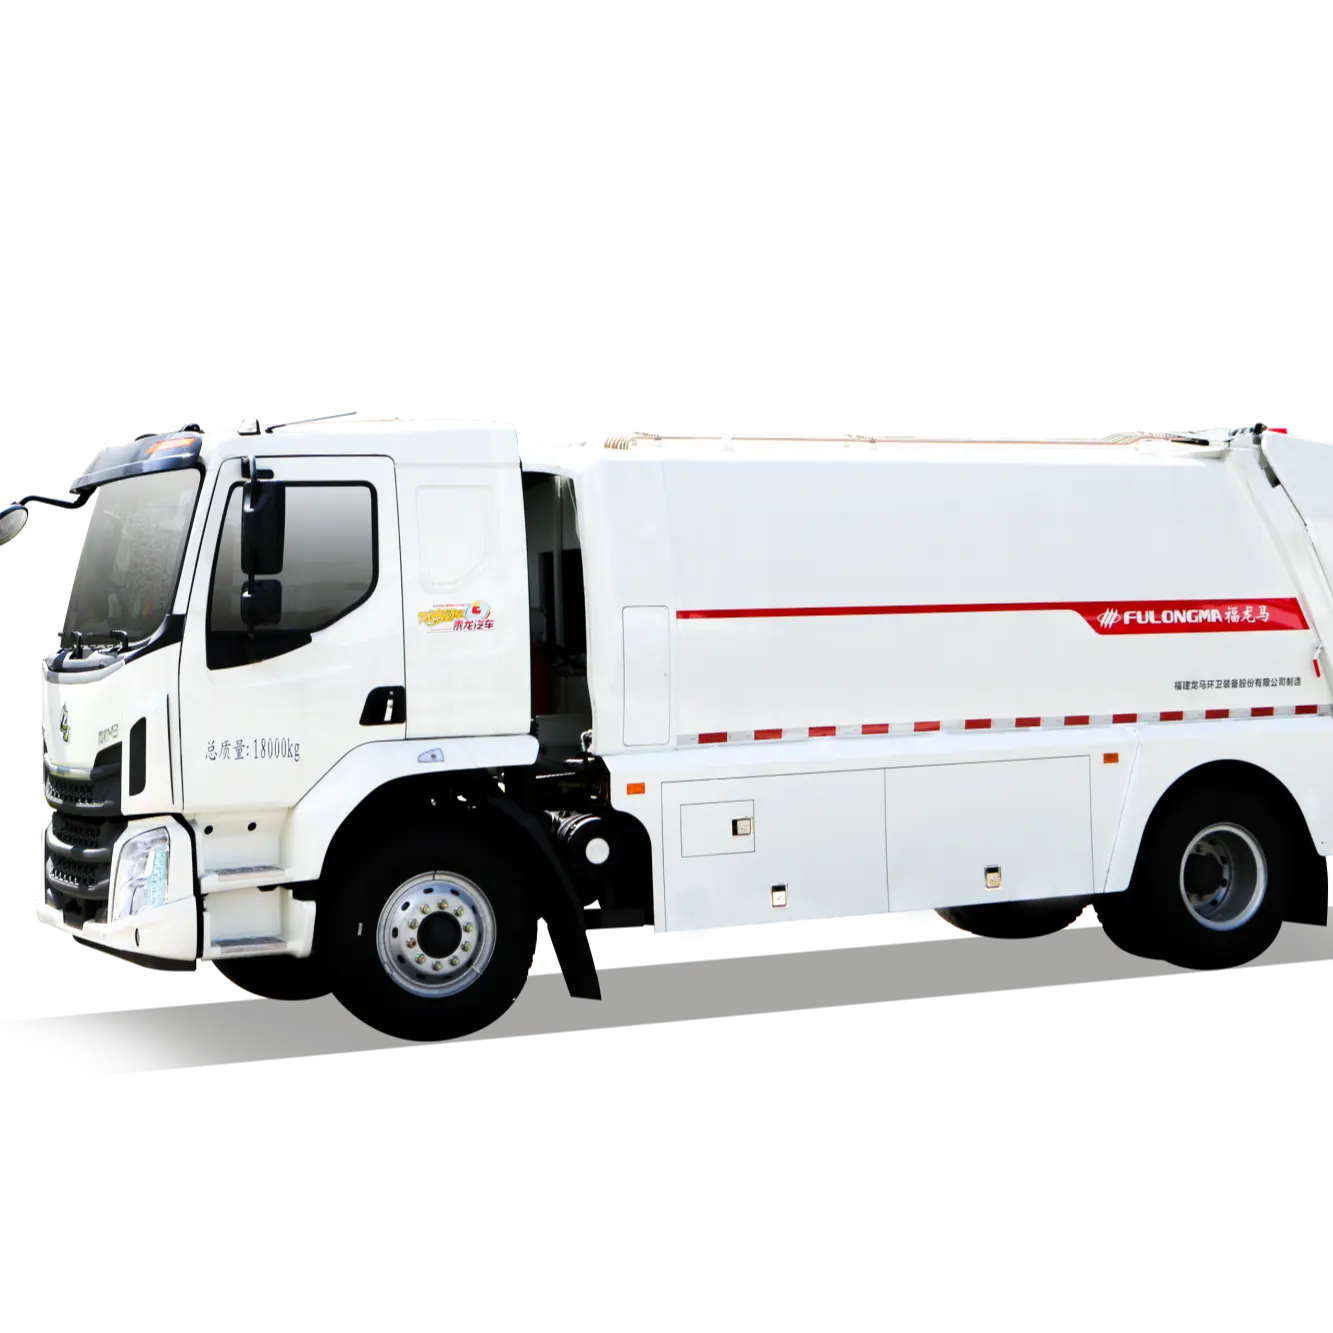 CHENGLONG 4200mm Wheelbase Electric Wet Waste Collection Garbage Compactor Truck Chassis